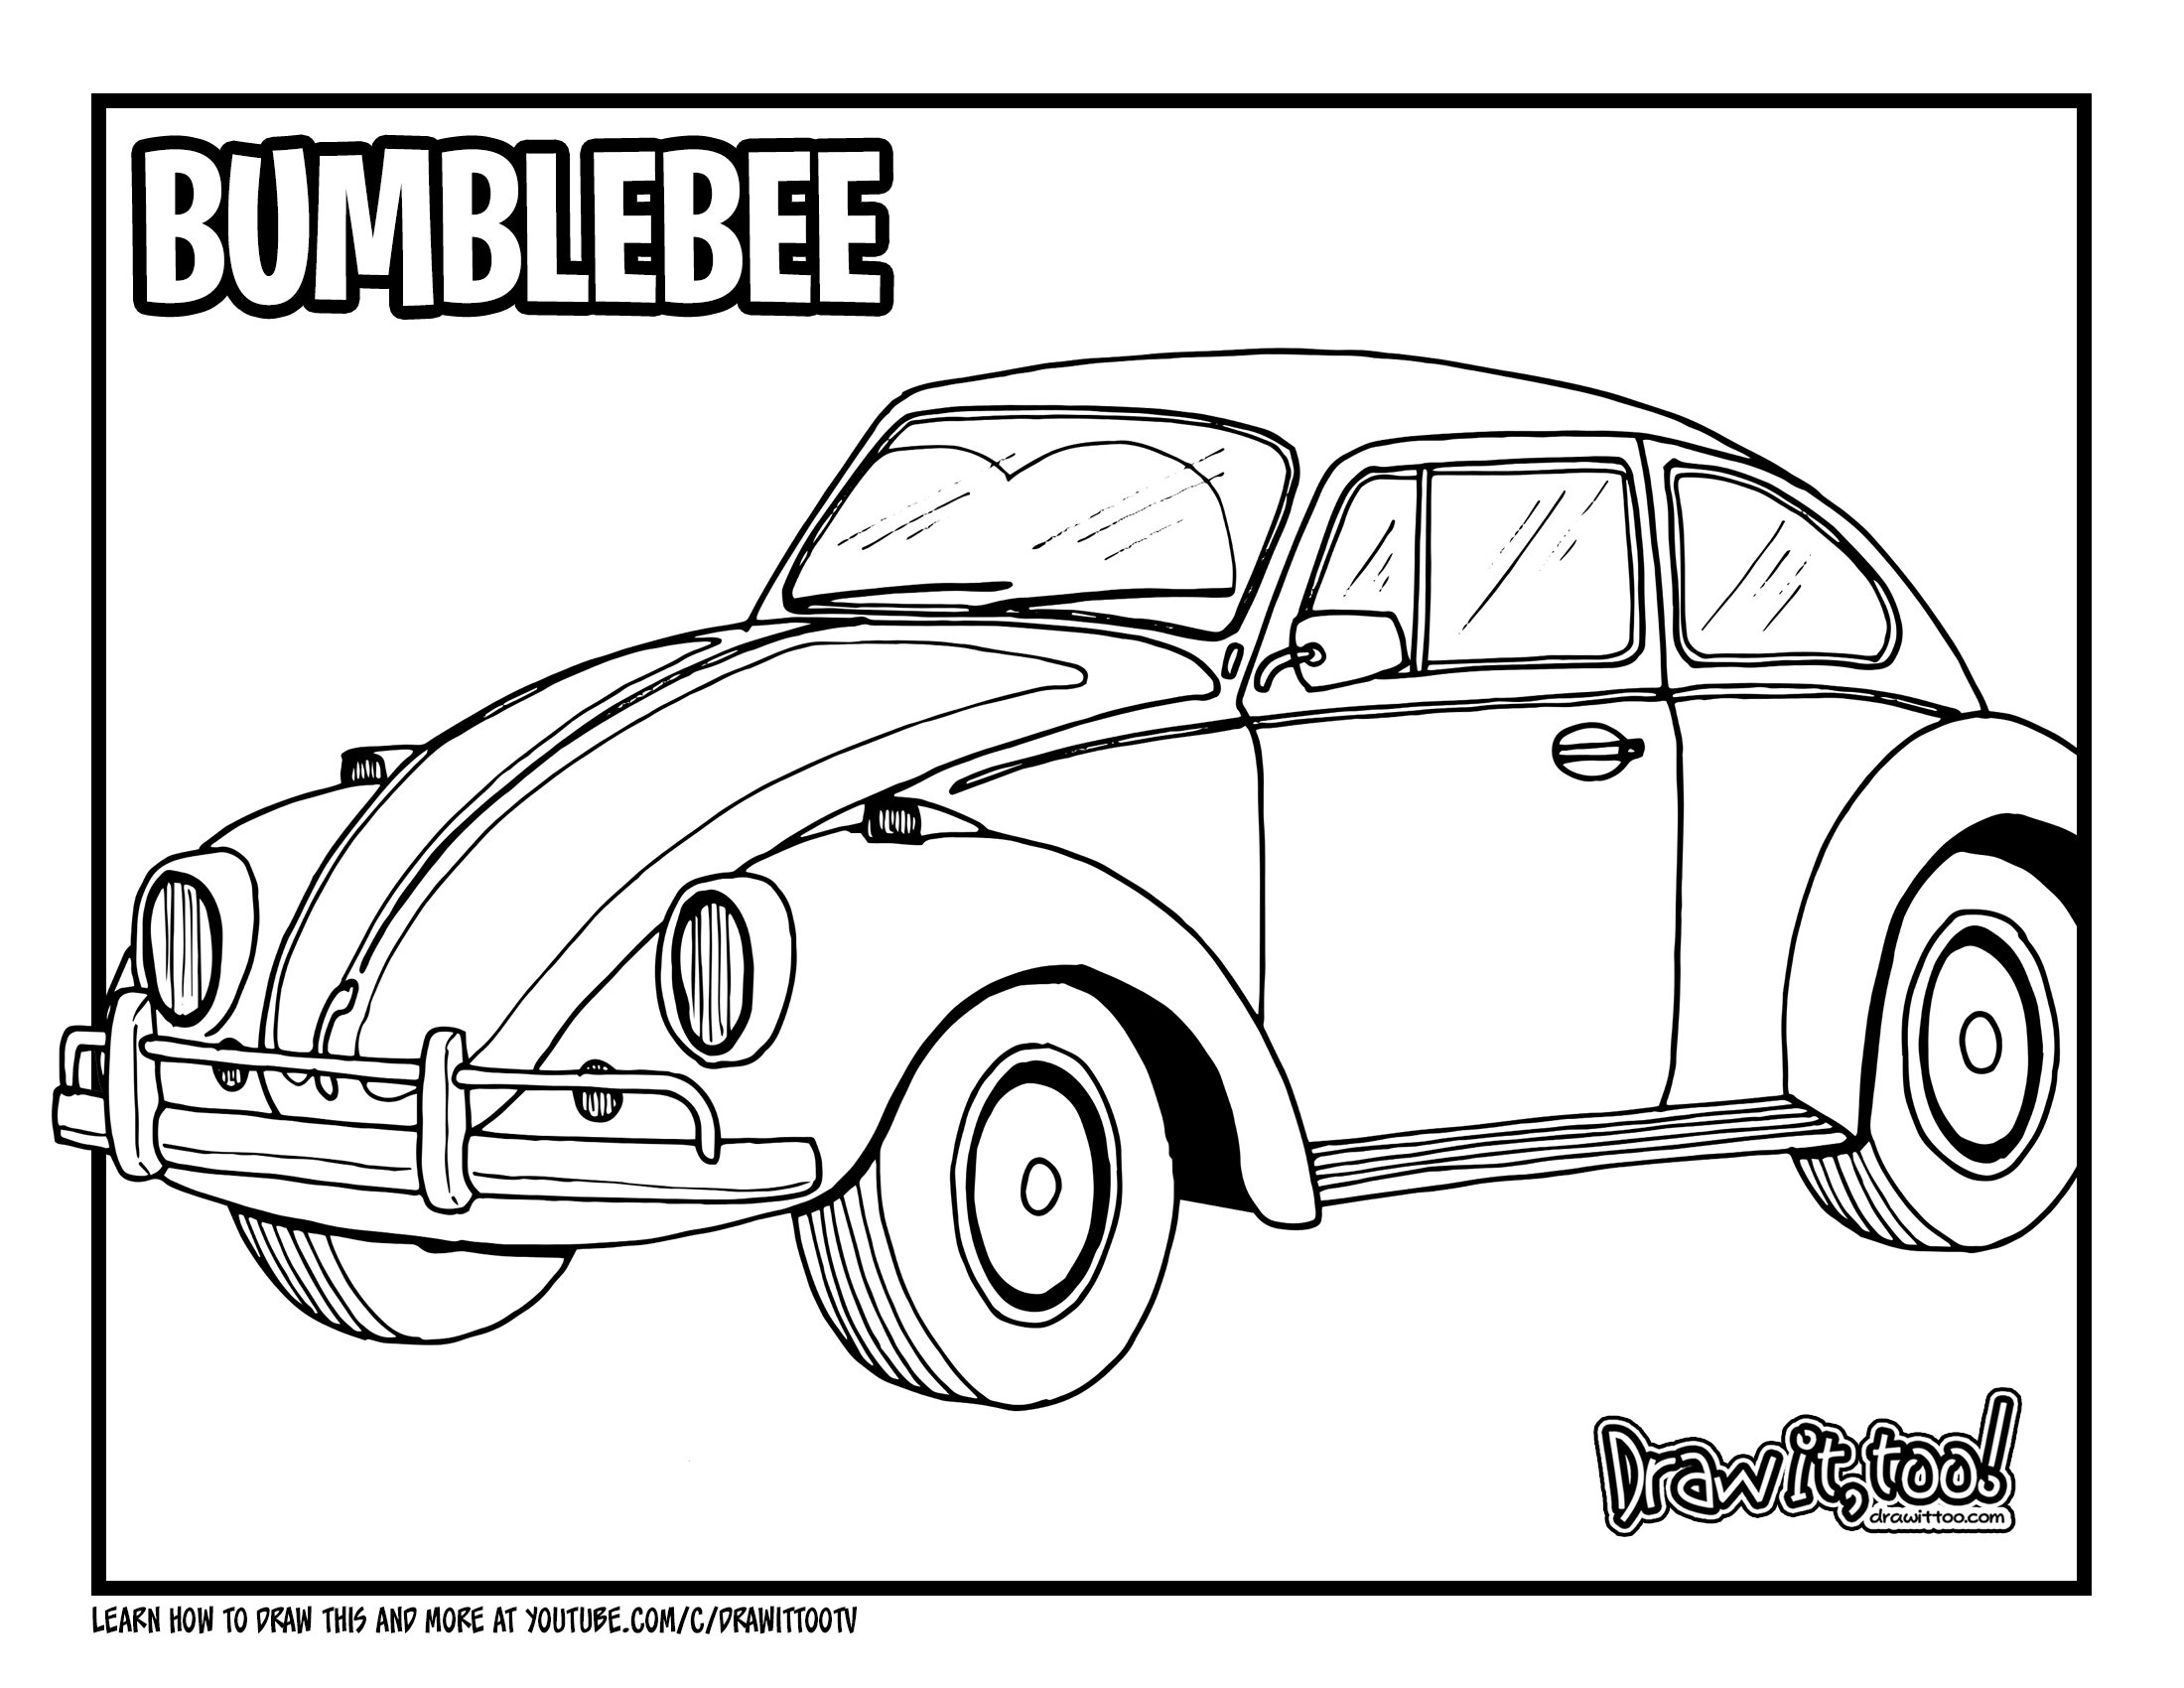 How to Draw BUMBLEBEE VEHICLE MODE (VW BEETLE) Drawing Tutorial Draw